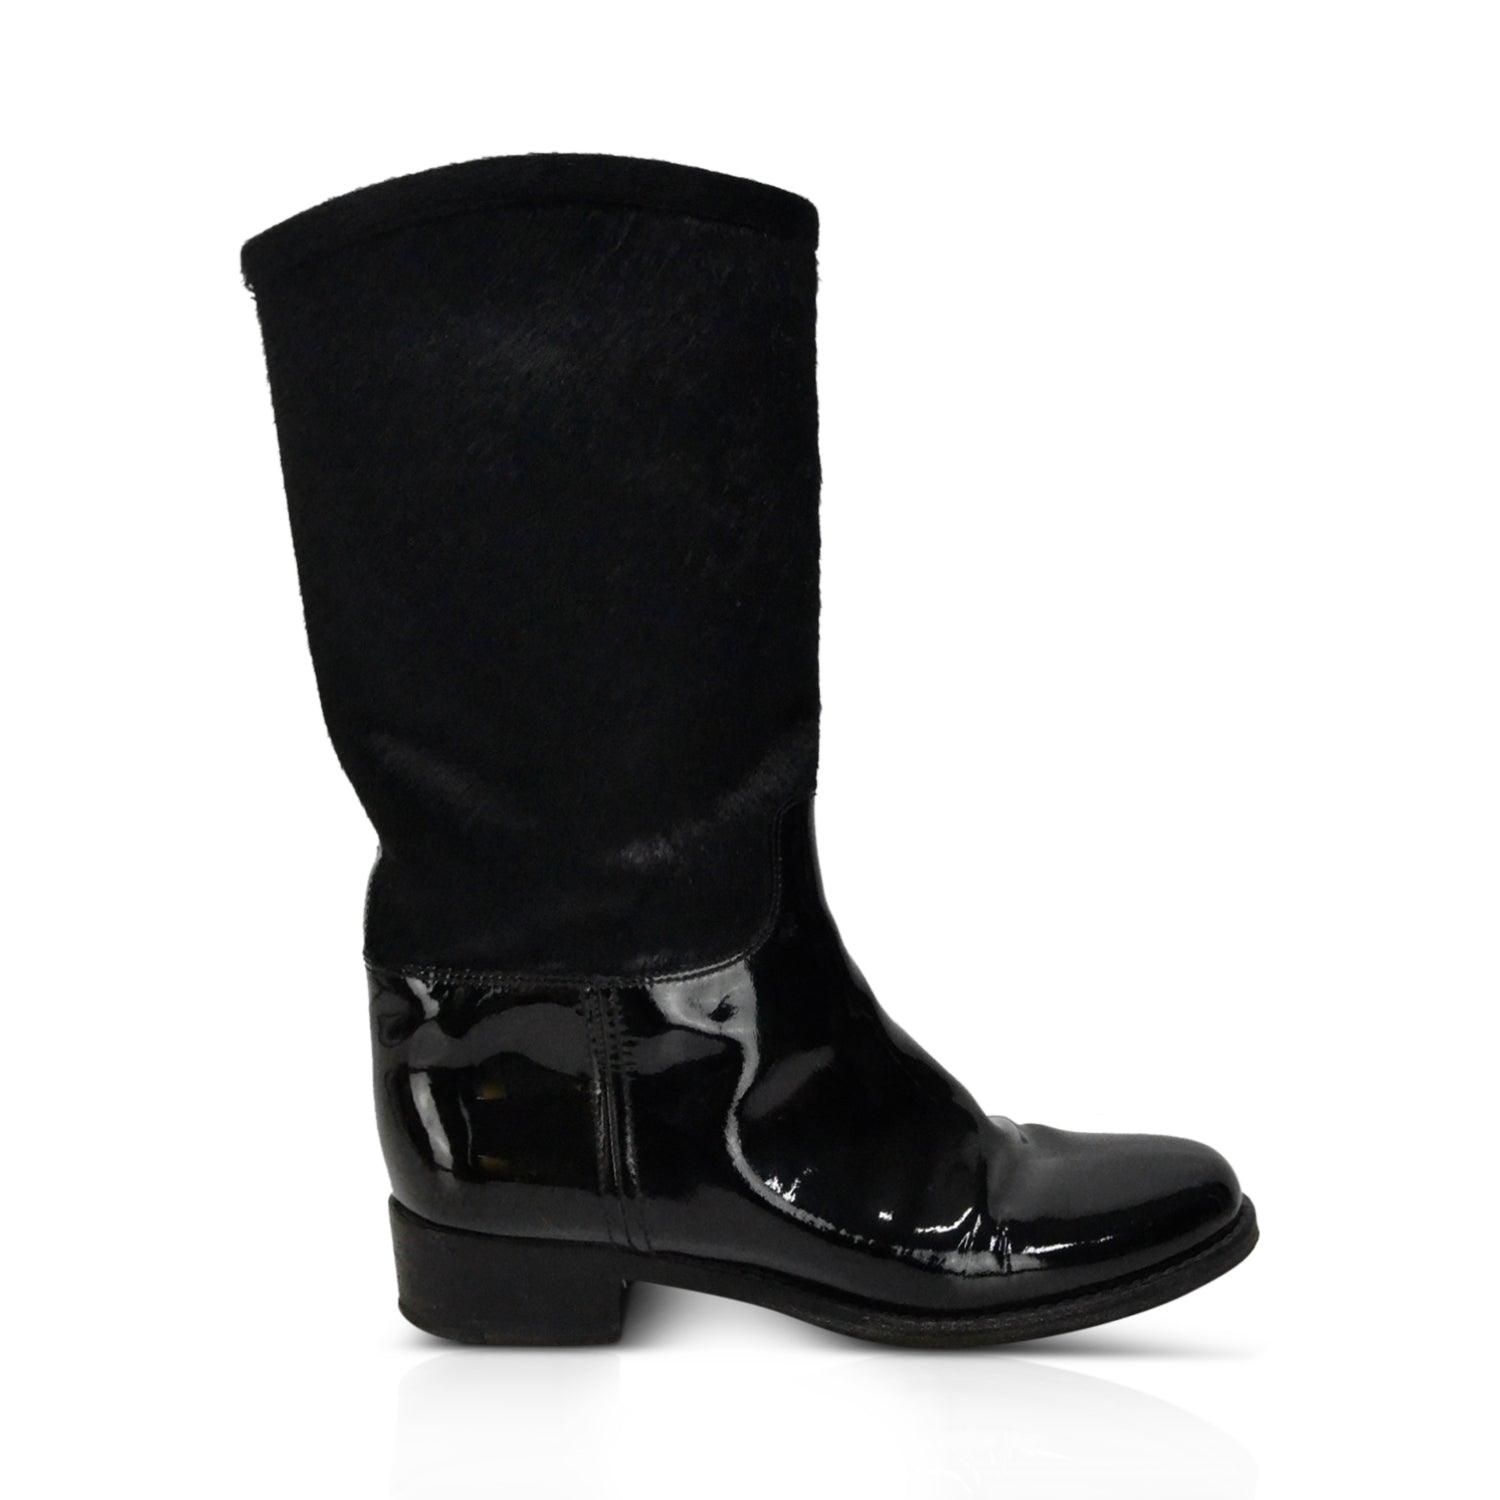 Chanel Boots - Women's 38.5 - Fashionably Yours